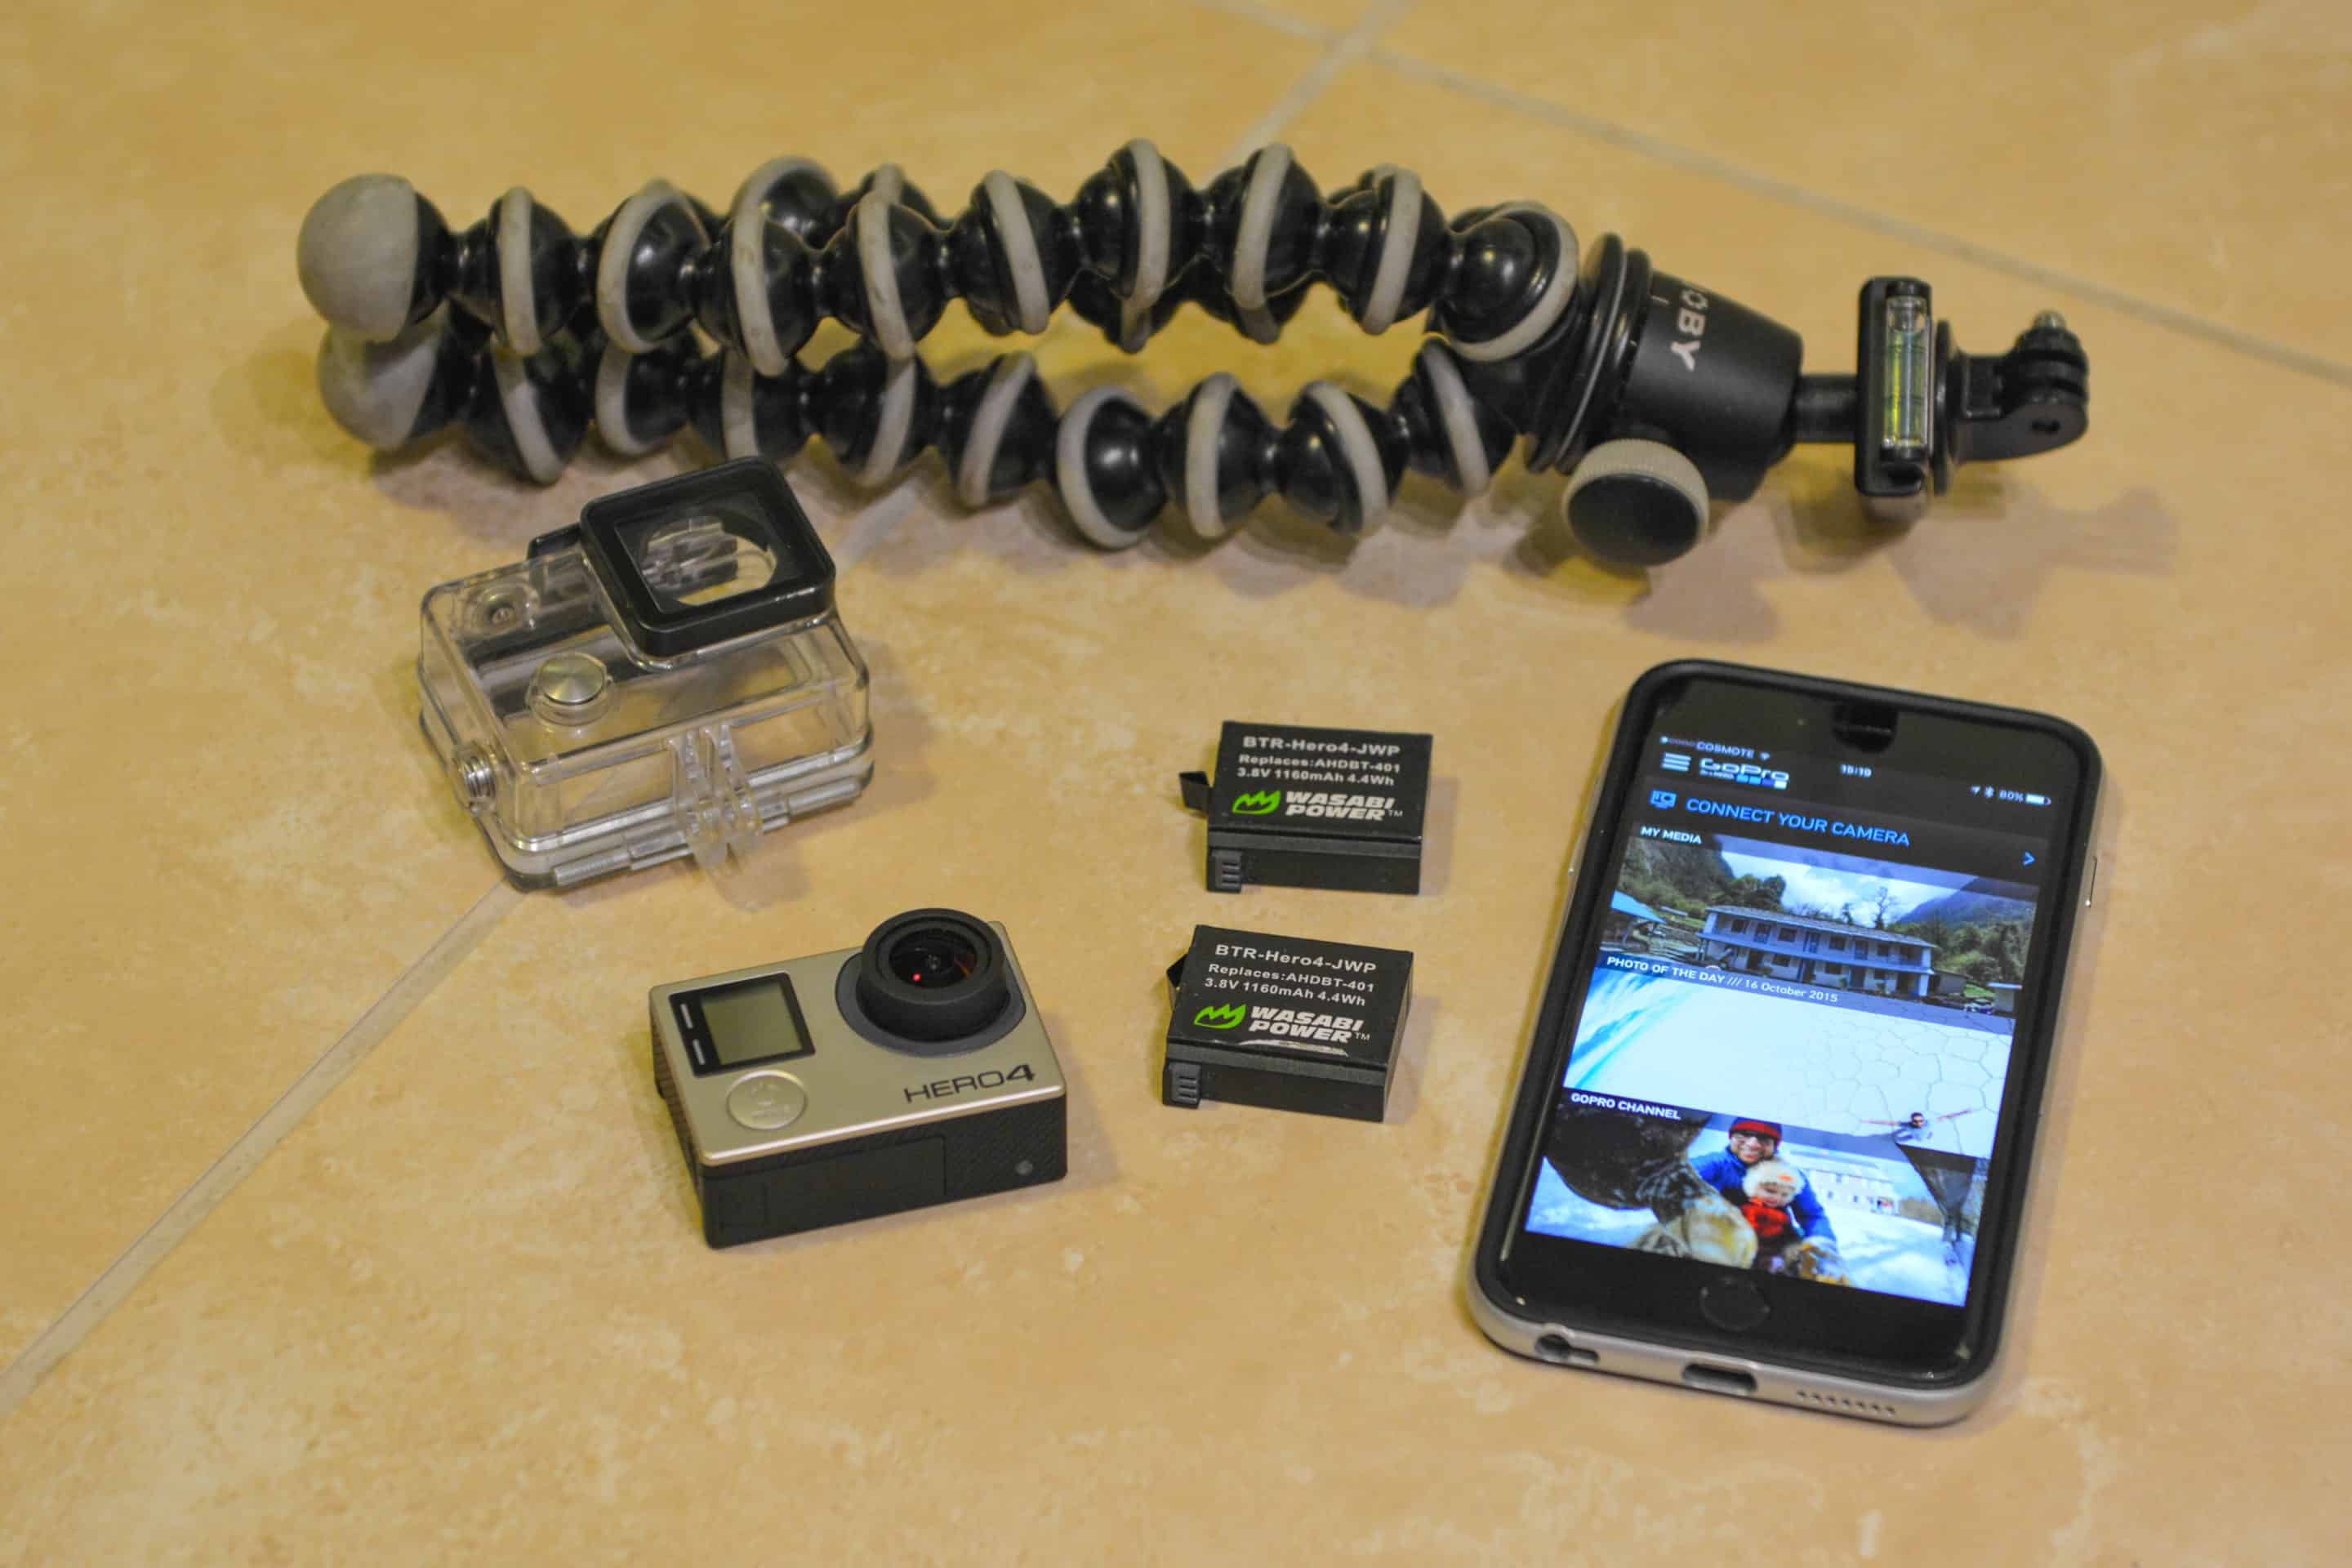 GoPro Gear Image (1 of 1)